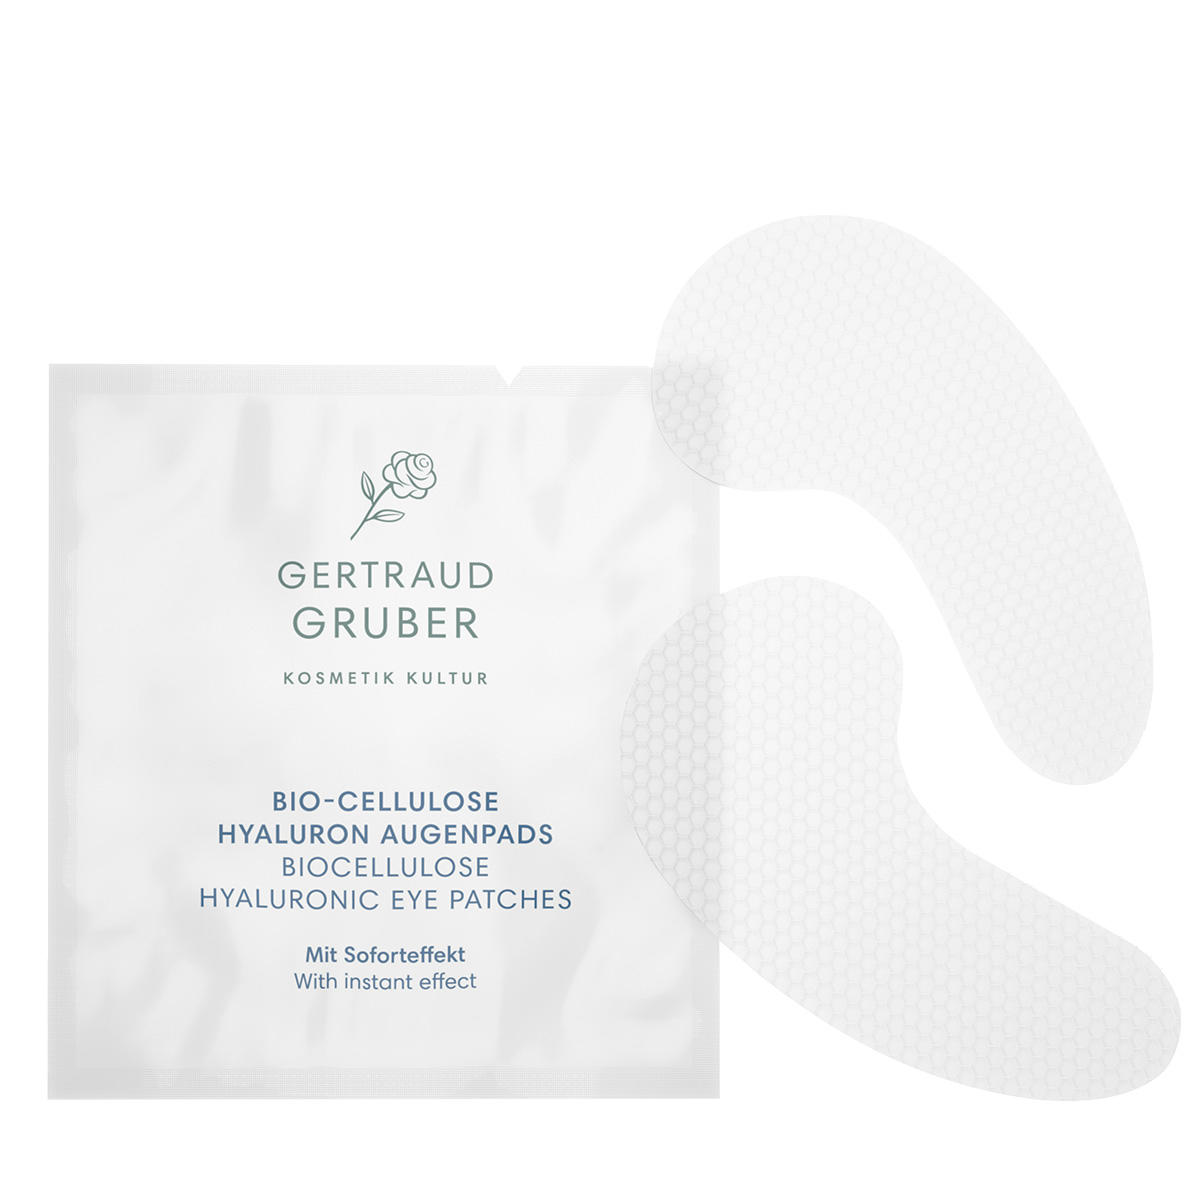 GERTRAUD GRUBER HYDRO WELLNESS PLUS Biocellulose hyaluronic eye patches 4 x 2 Stück - 1